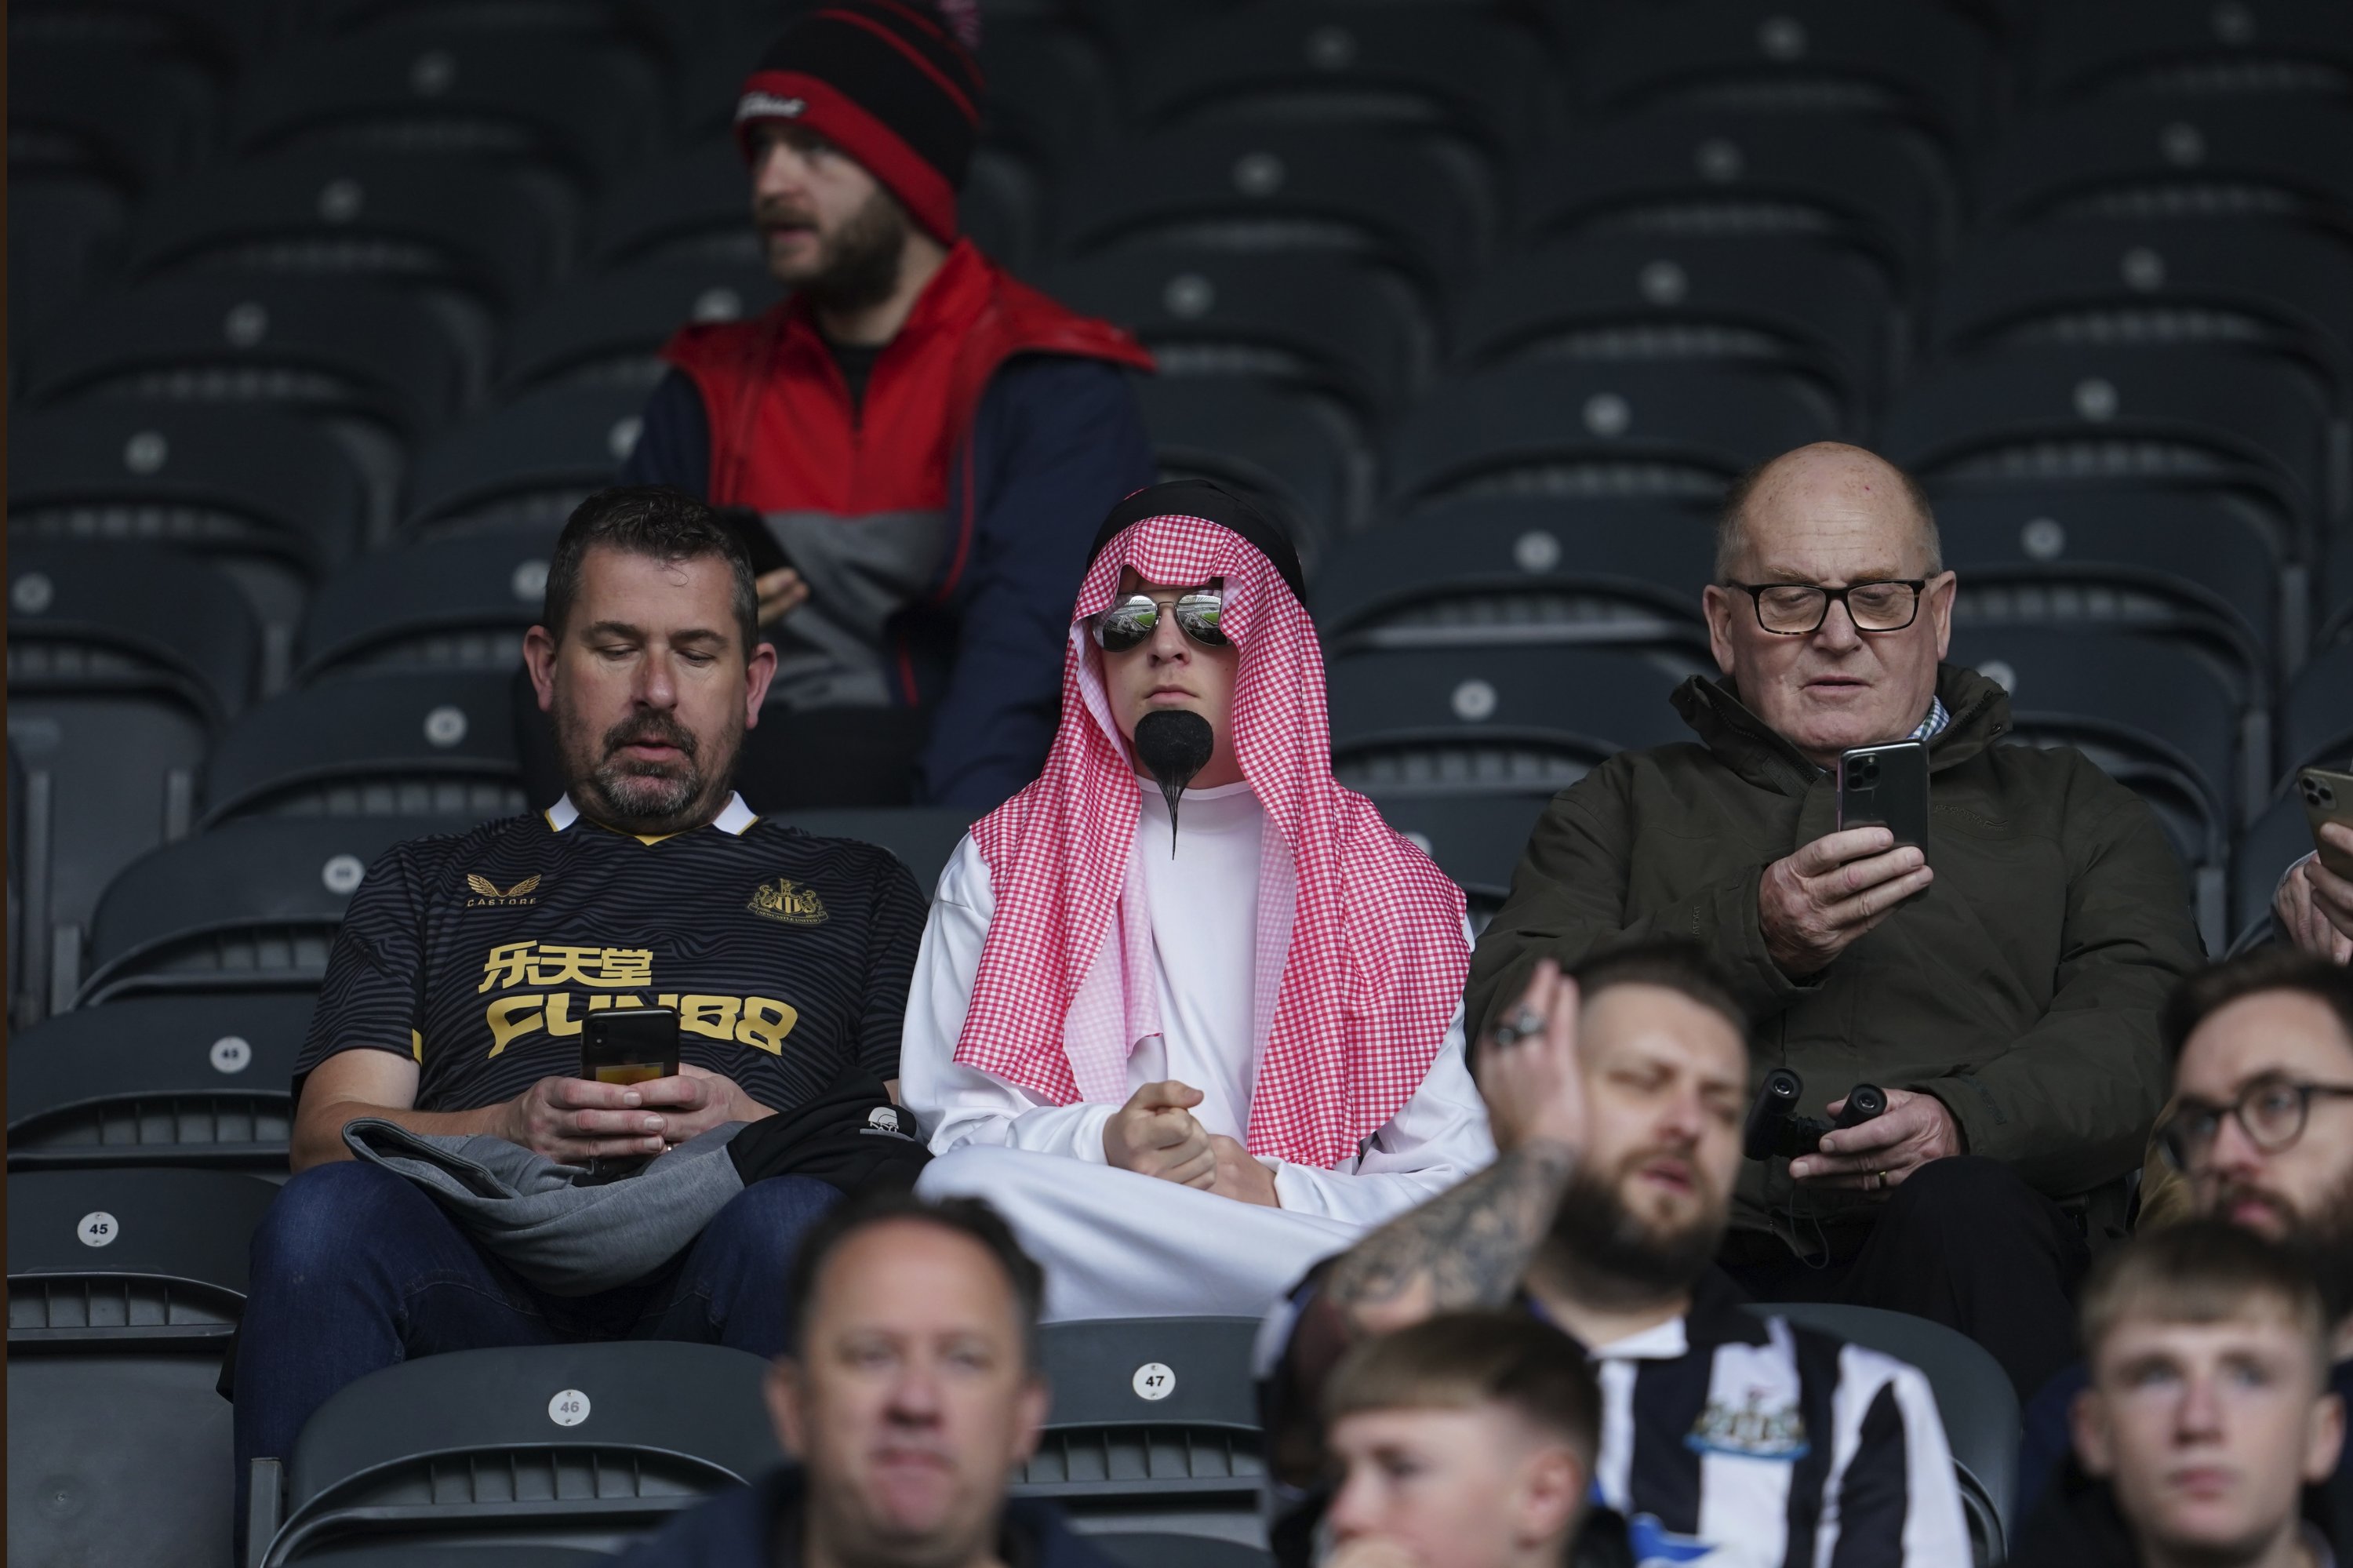 Newcastle fans wait for the start of an English Premier League match between Newcastle and Tottenham Hotspur at St. James' Park in Newcastle, England, Oct. 17, 2021. (AP Photo)